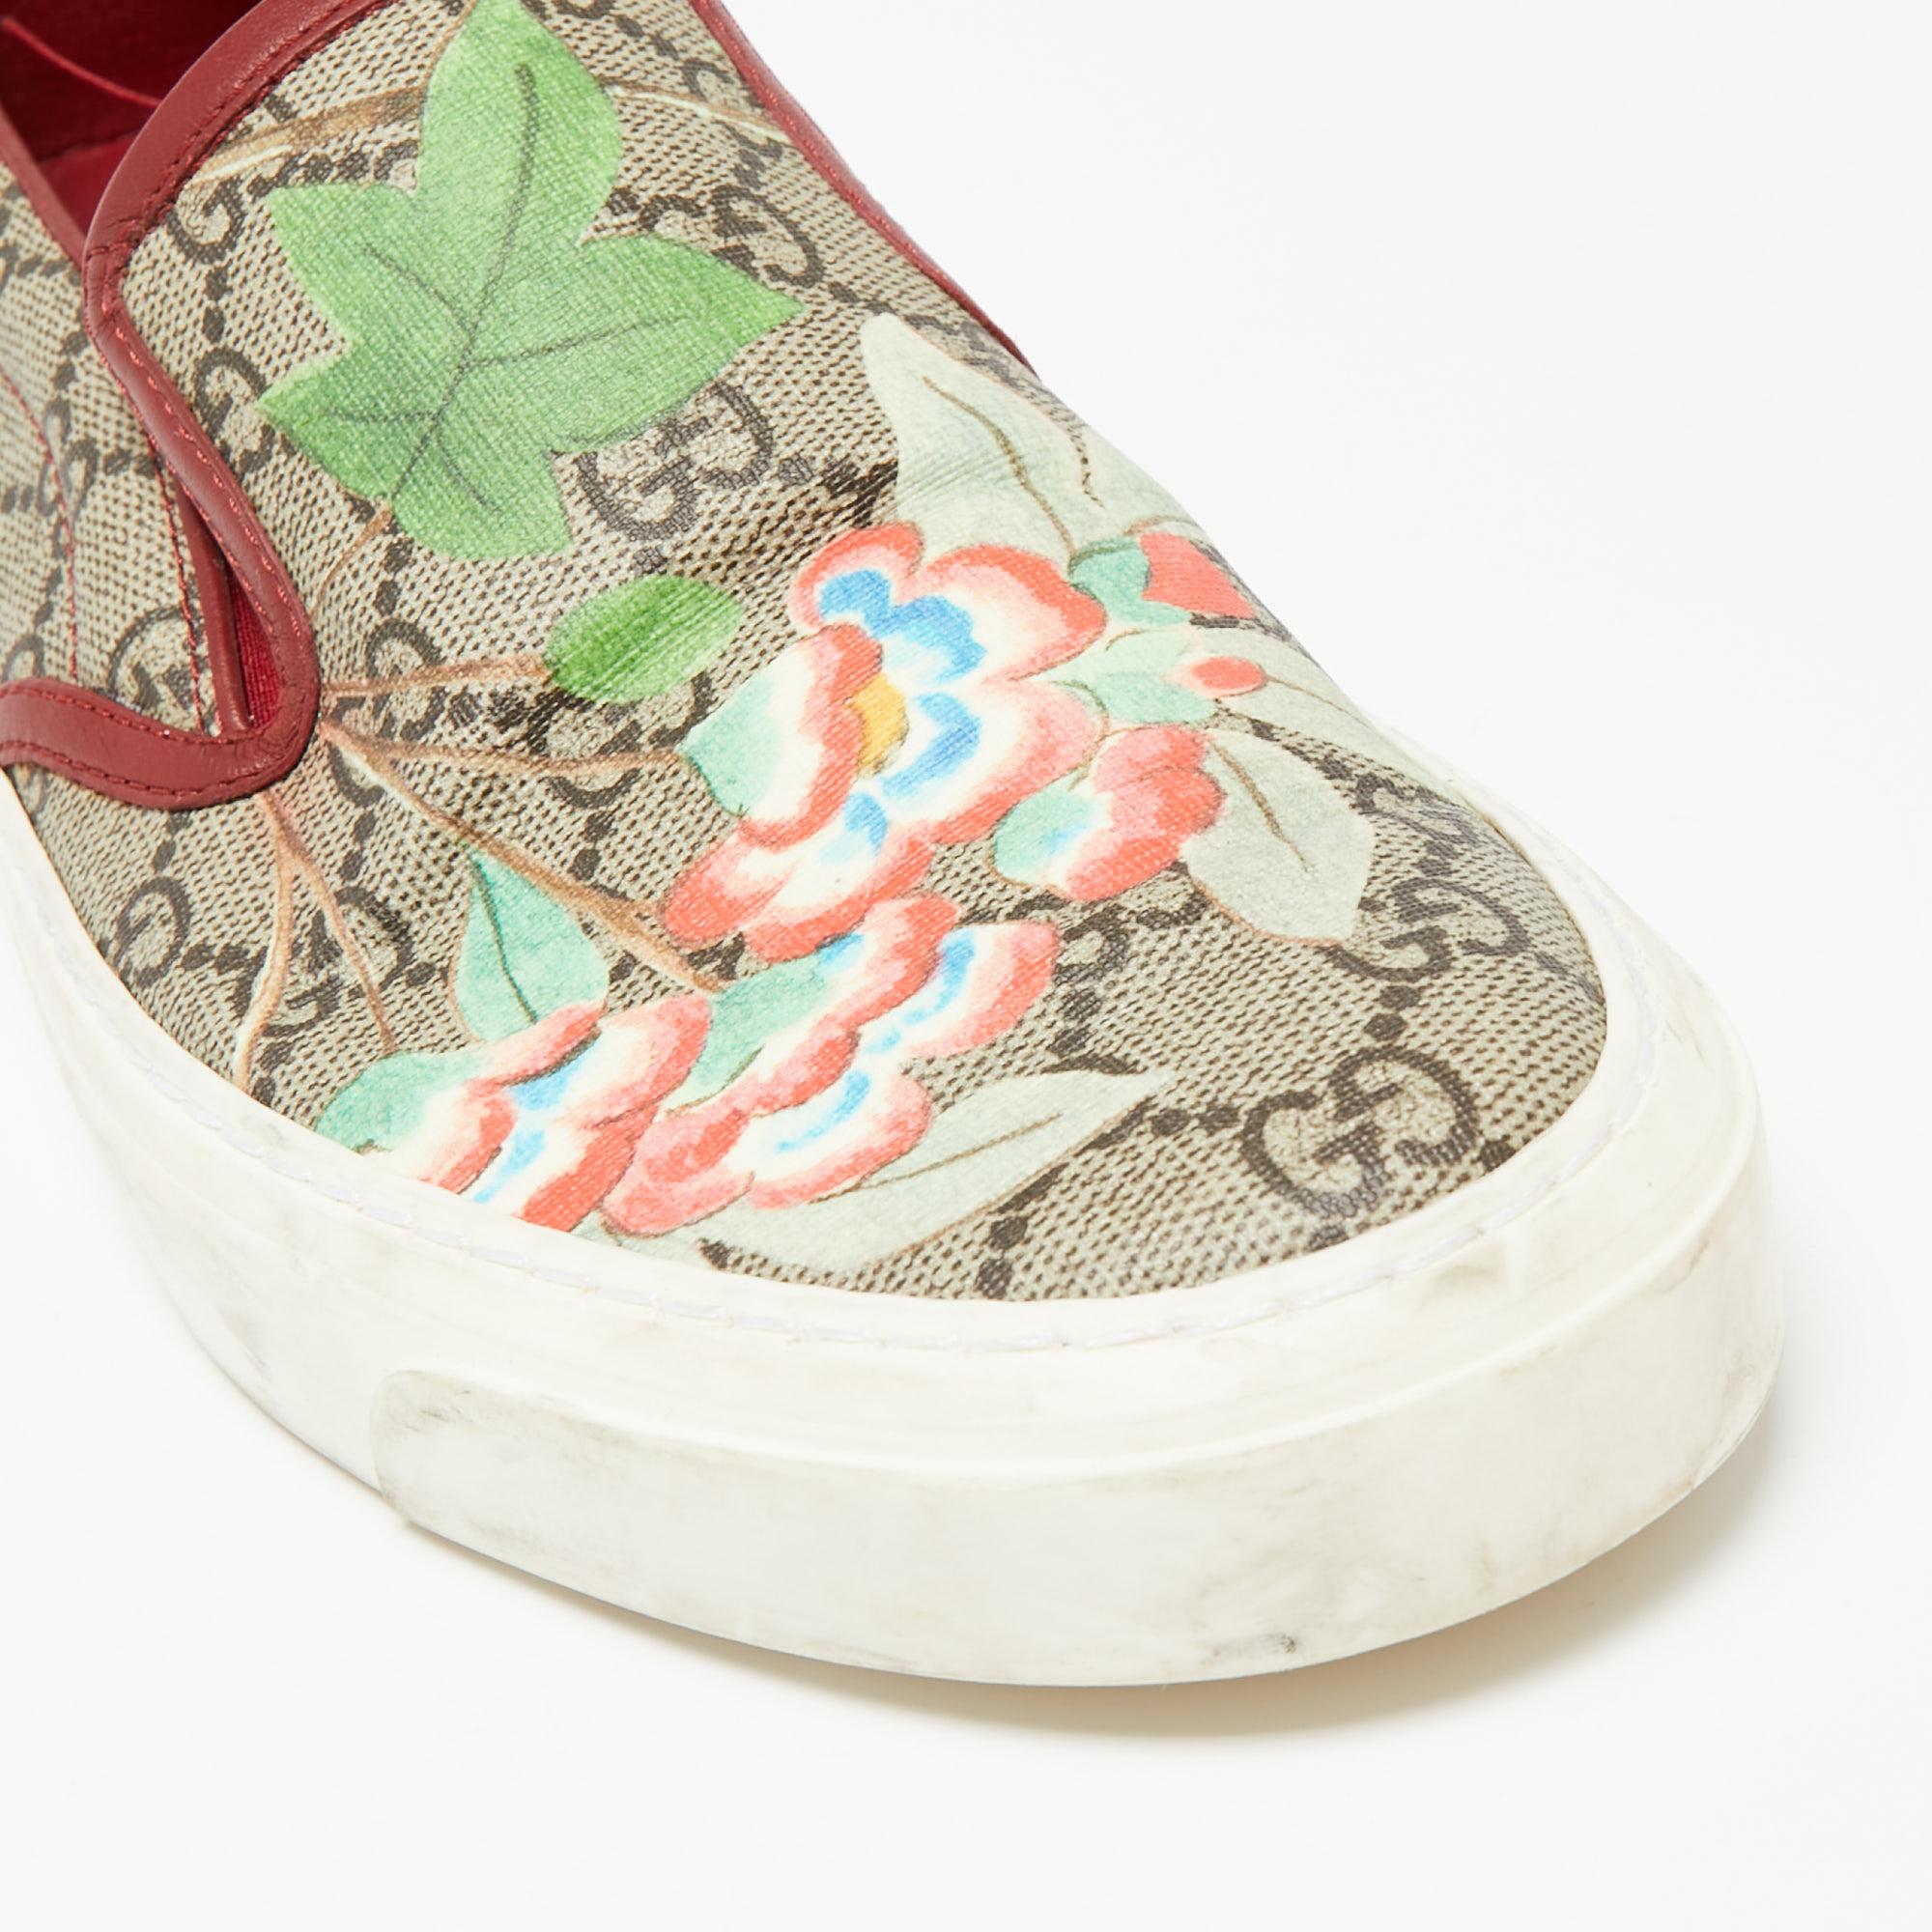 Gucci Multicolor GG Supreme Blooms Printed Canvas Slip On Sneakers Size 40 1